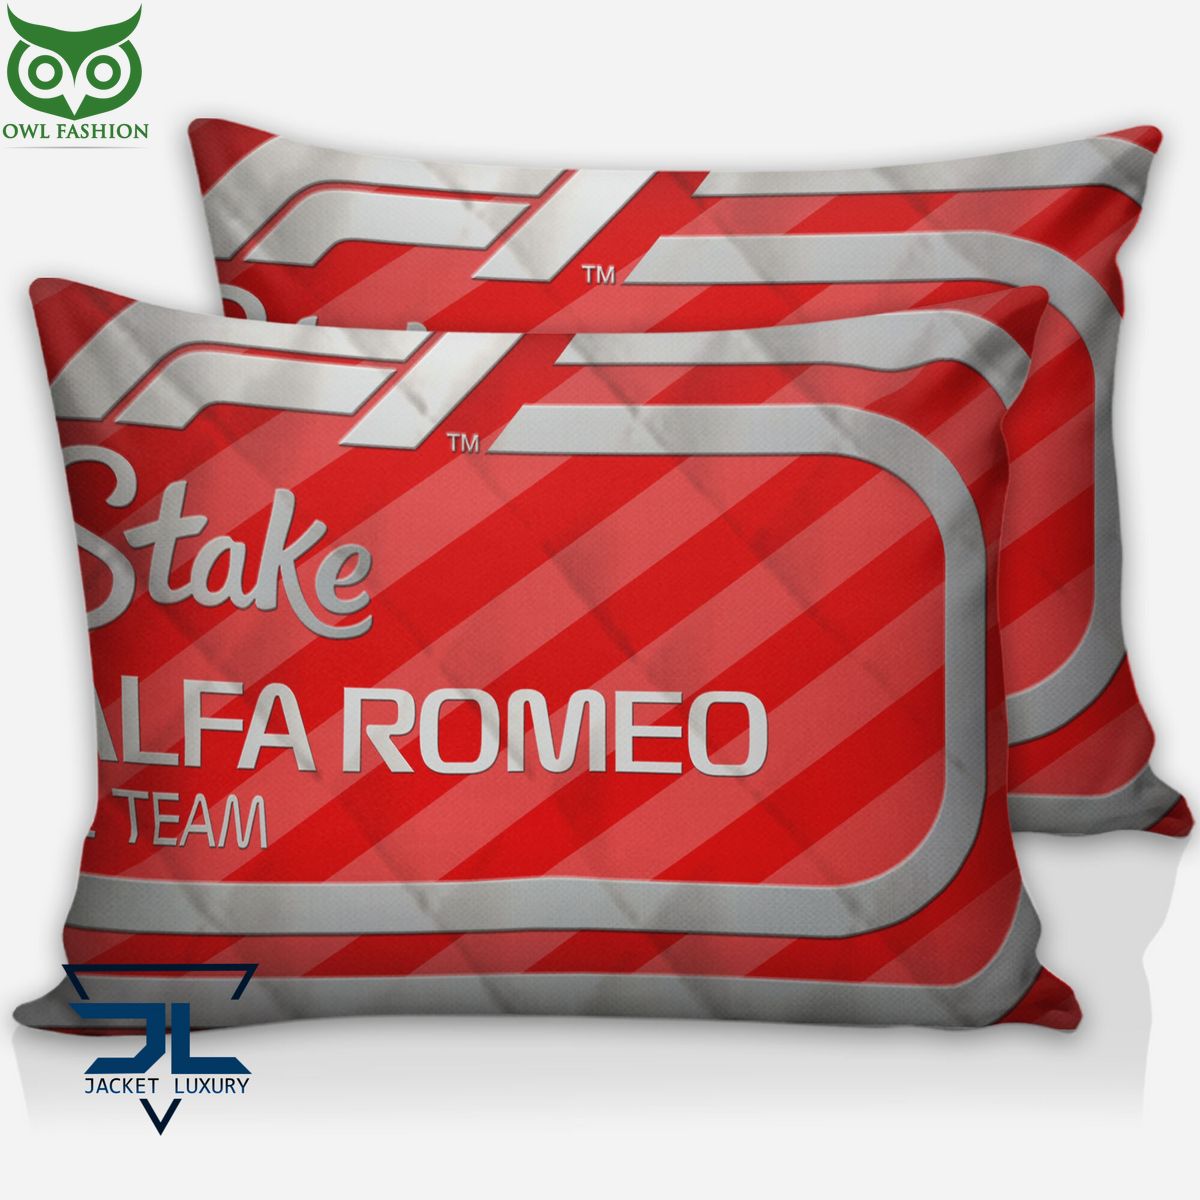 Alfa Romeo F1 Team Quilt Bedding Set Wow! This is gracious